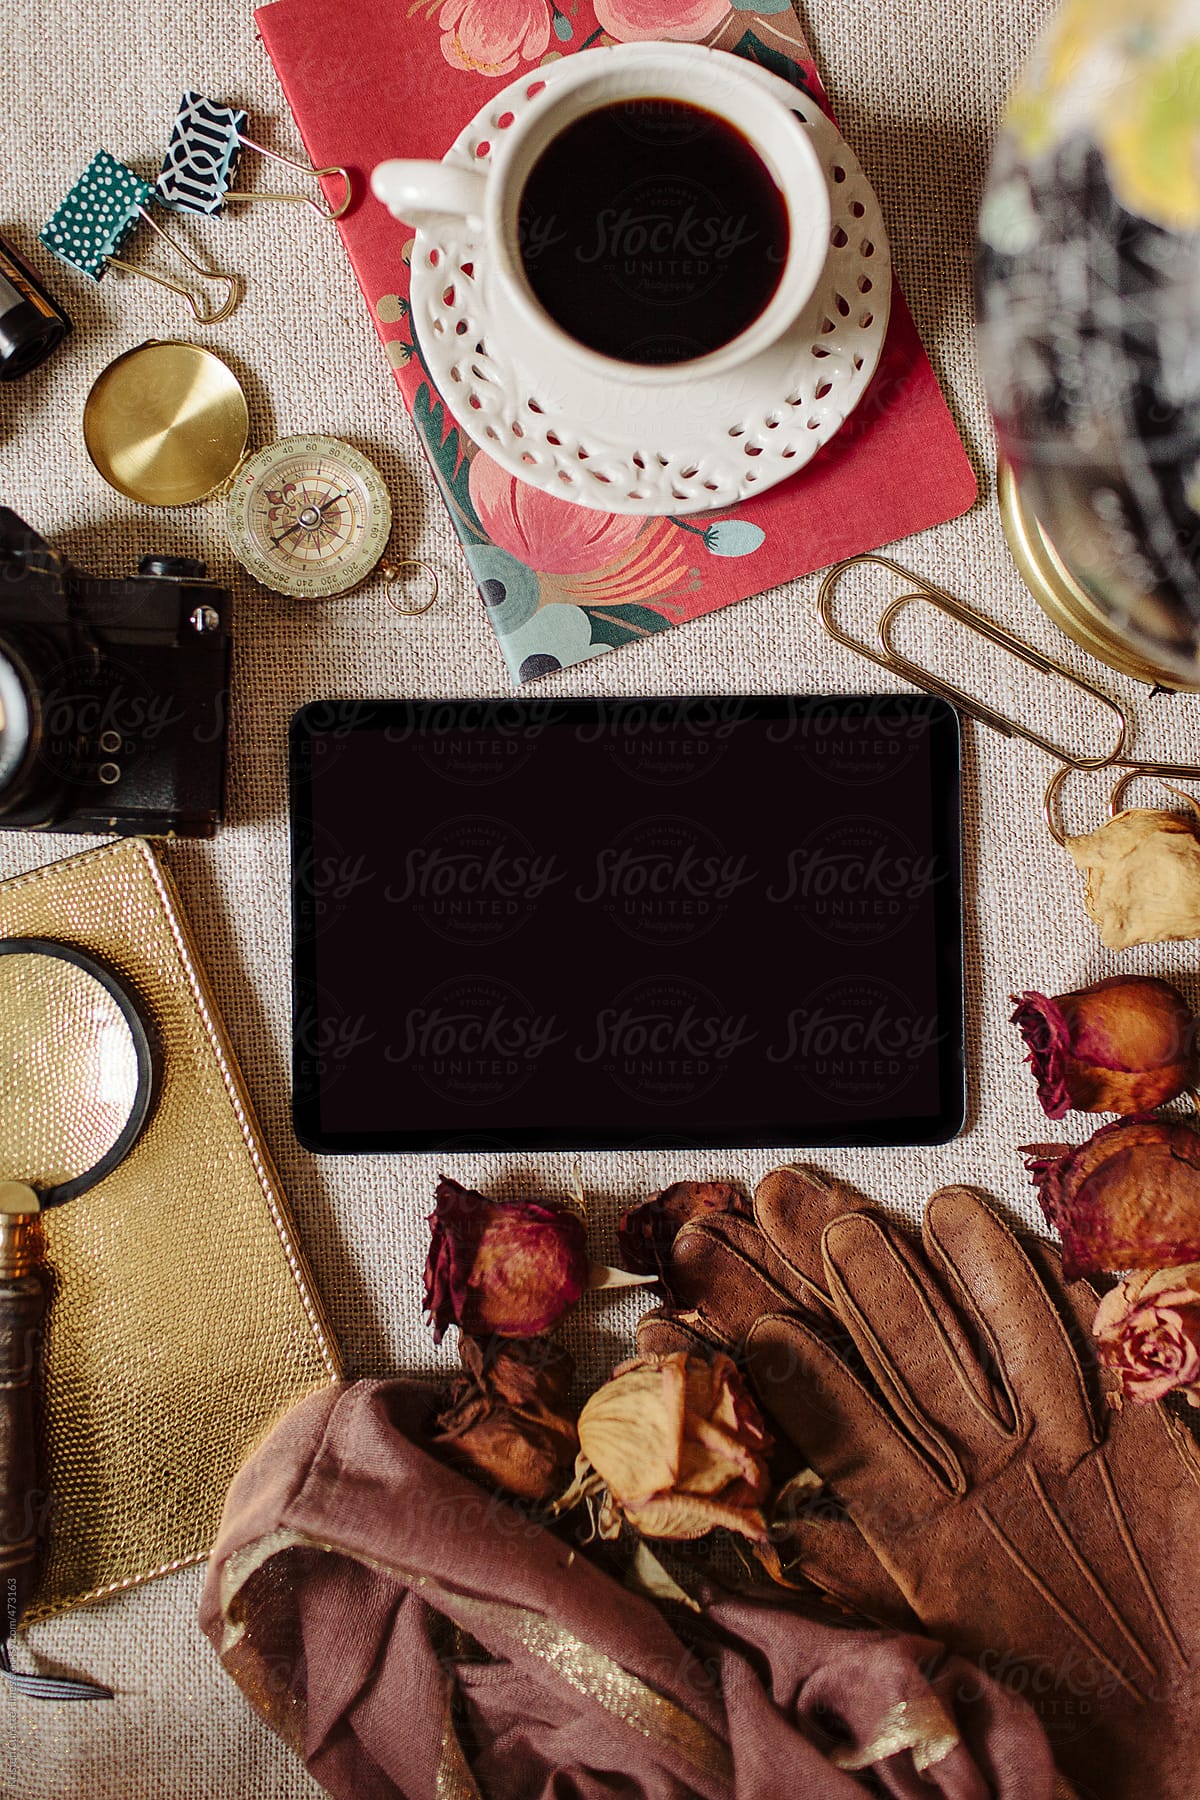 A smart tablet surround by traveling accessories